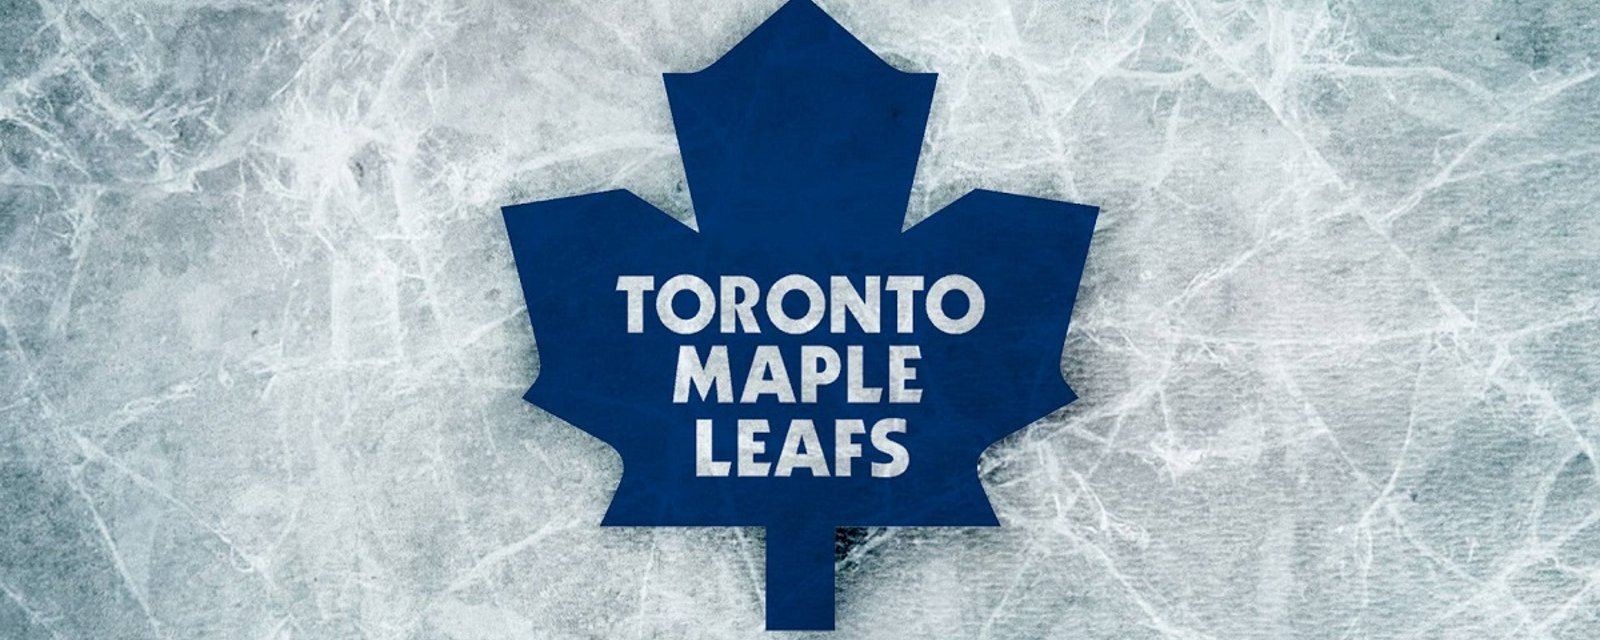 Rumor: The Toronto Maple Leafs may be planning a move.